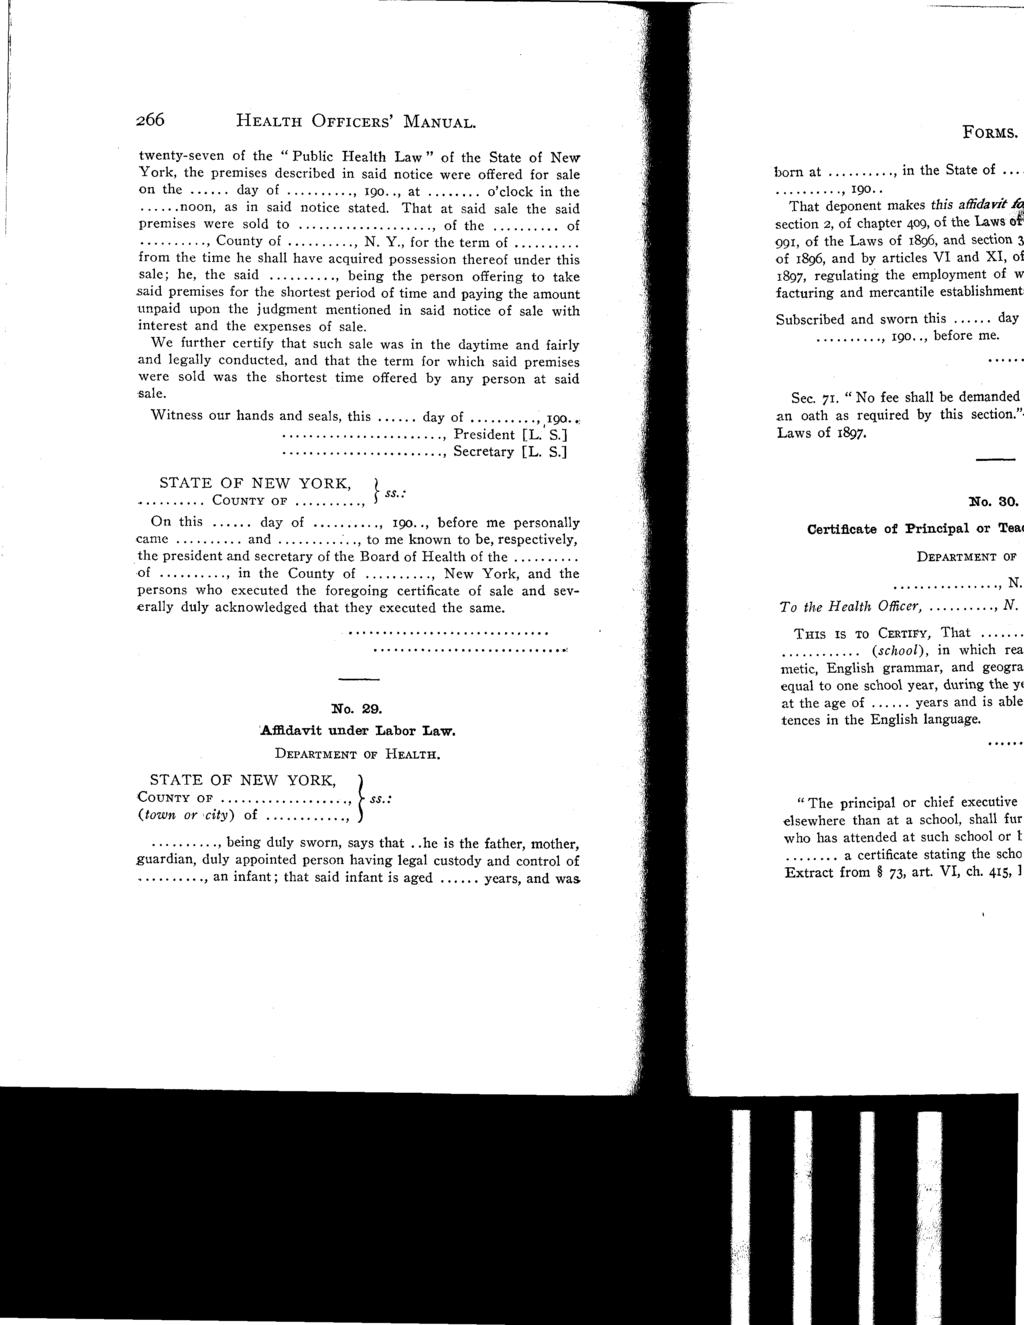 266 HEALTH OFFICERS' MANUAL. twenty-seven of the "Public Health Law" of the State of New York, the premises described in said notice were offered for sale on the day of 19o.